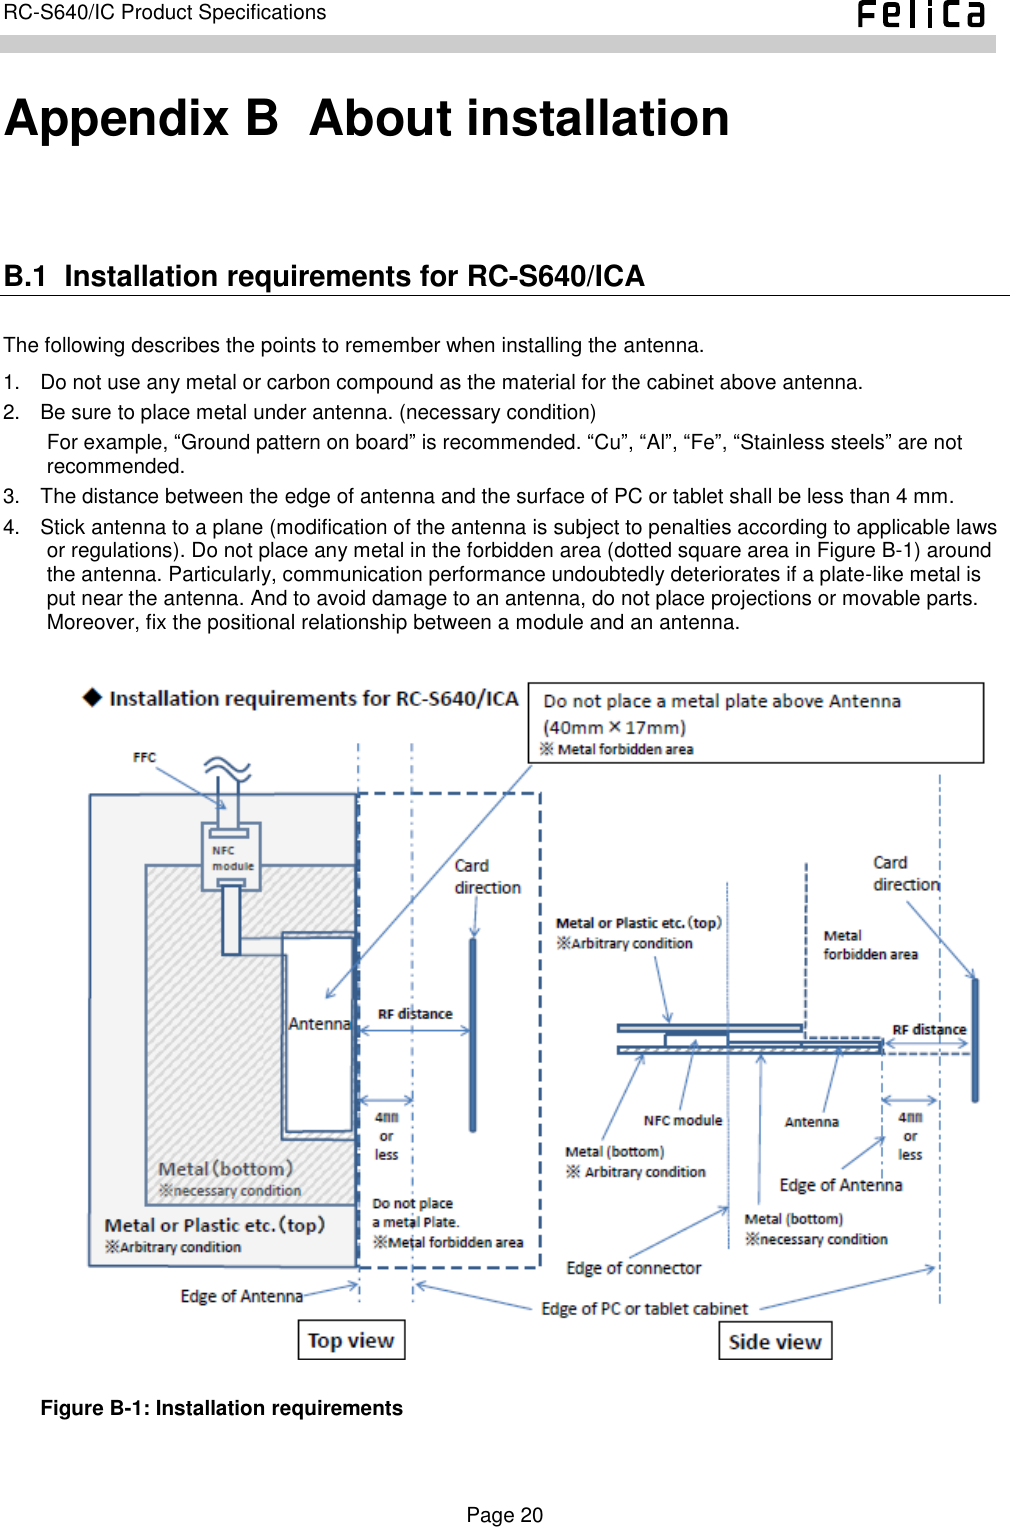    Page 20     RC-S640/IC Product Specifications    Appendix B  About installation B.1  Installation requirements for RC-S640/ICA The following describes the points to remember when installing the antenna. 1.  Do not use any metal or carbon compound as the material for the cabinet above antenna.   2.  Be sure to place metal under antenna. (necessary condition) For example, “Ground pattern on board” is recommended. “Cu”, “Al”, “Fe”, “Stainless steels” are not recommended. 3.  The distance between the edge of antenna and the surface of PC or tablet shall be less than 4 mm. 4.  Stick antenna to a plane (modification of the antenna is subject to penalties according to applicable laws or regulations). Do not place any metal in the forbidden area (dotted square area in Figure B-1) around the antenna. Particularly, communication performance undoubtedly deteriorates if a plate-like metal is put near the antenna. And to avoid damage to an antenna, do not place projections or movable parts. Moreover, fix the positional relationship between a module and an antenna.    Figure B-1: Installation requirements    